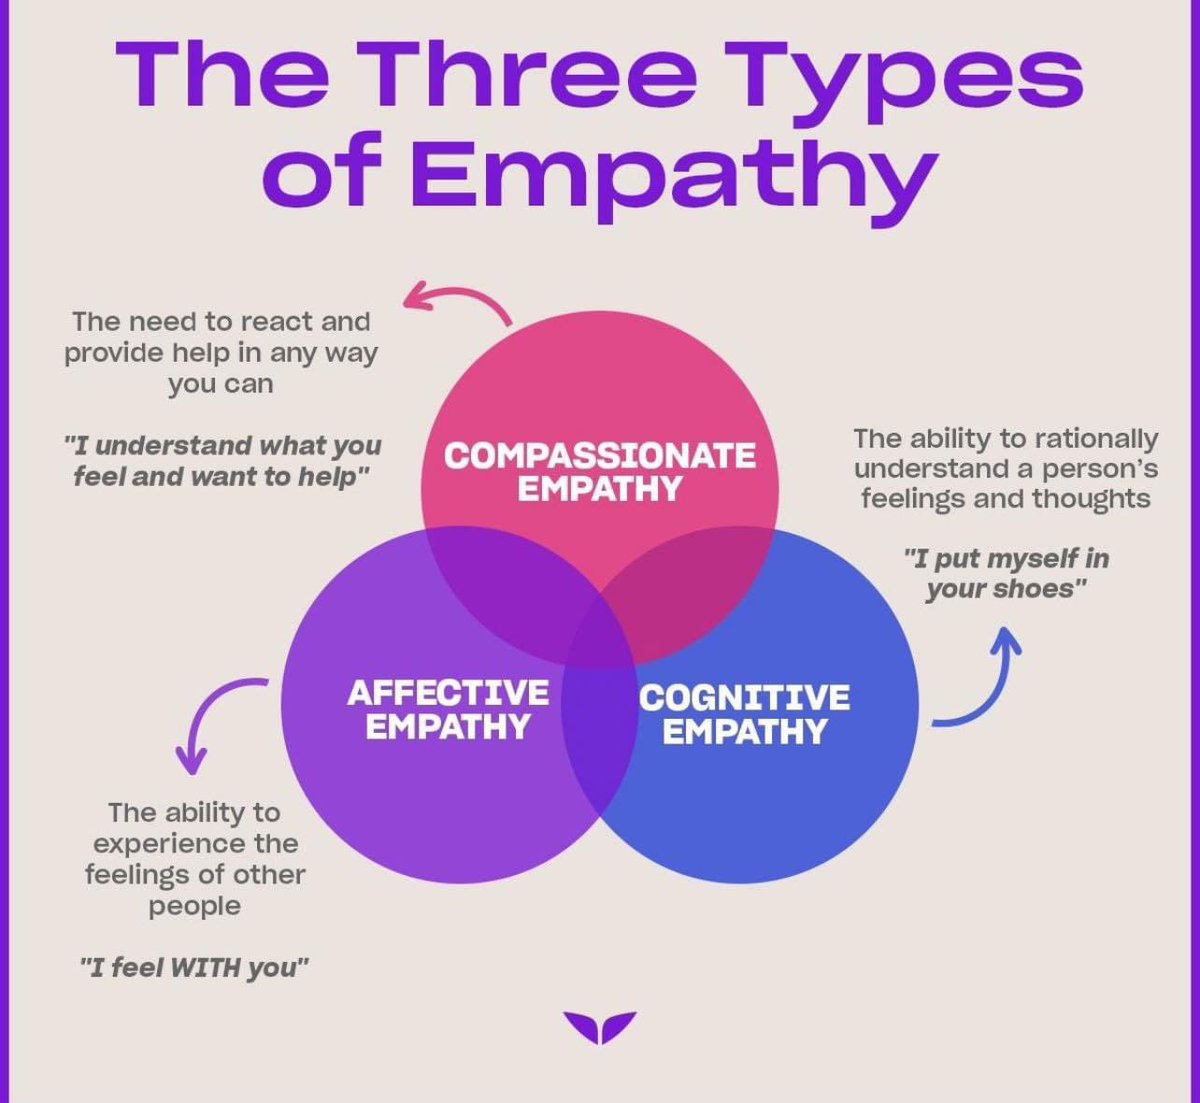 The three types of empathy are all important in their own ways. #empathy #LeadershipDevelopment